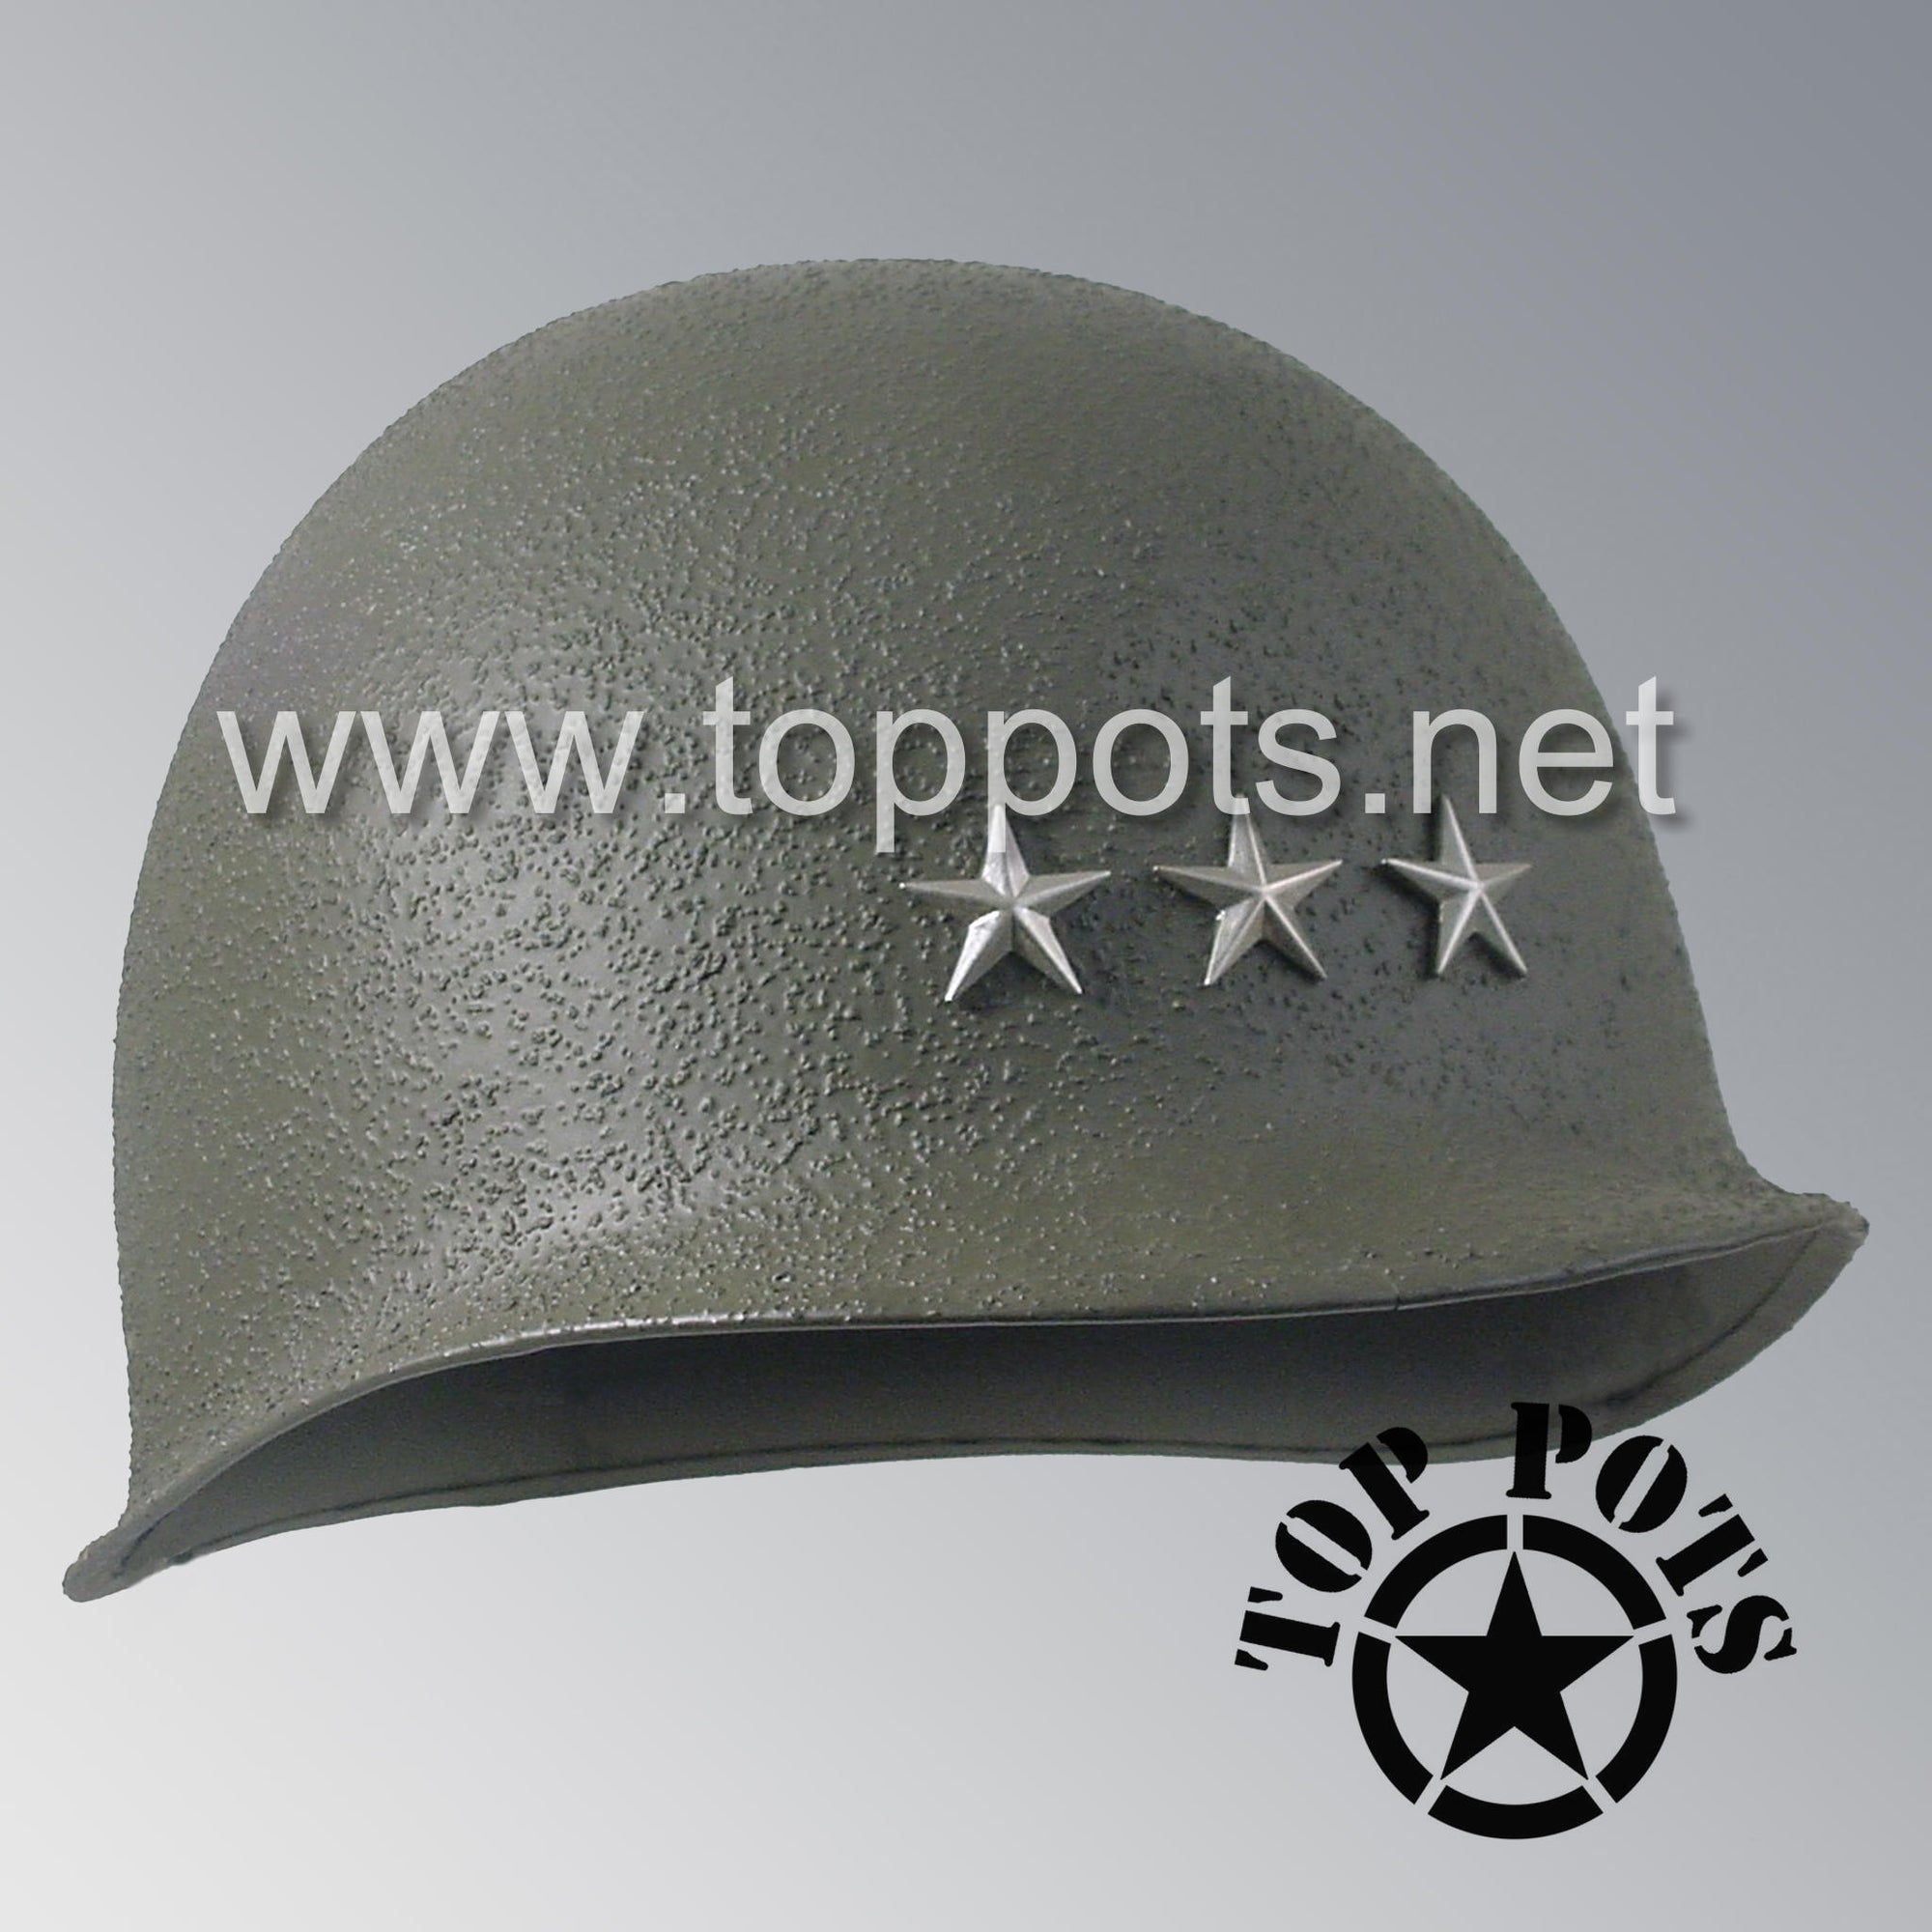 WWII US Army Restored Original M1 Infantry Helmet Swivel Bale Shell with Patton 3rd Army Lt. General Rank (Shell Only)